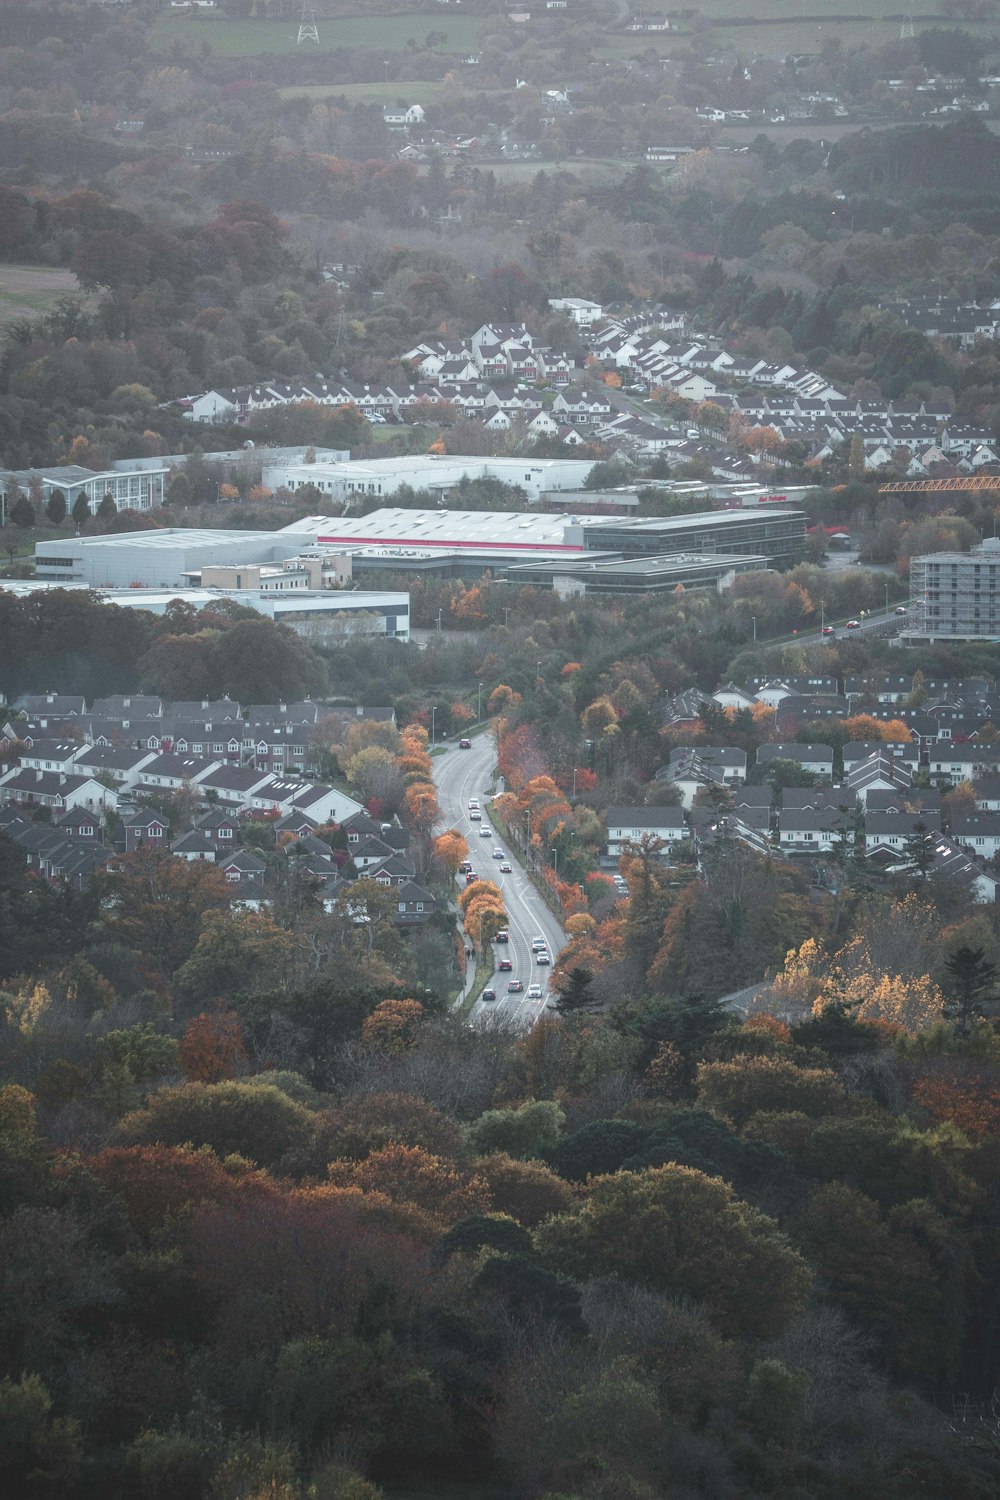 an aerial view of a city with lots of trees